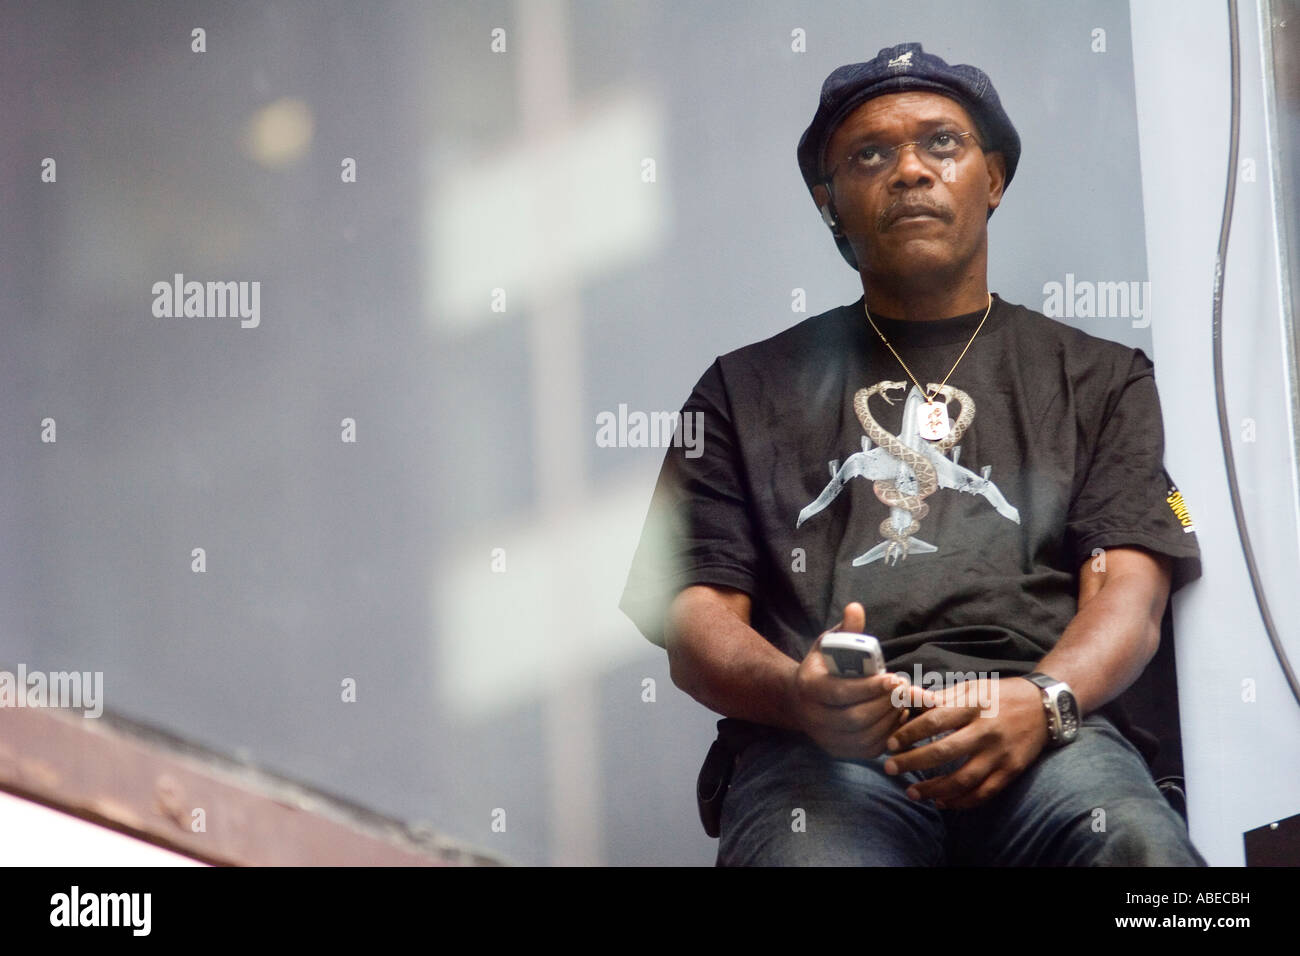 Samuel L. Jackson in Times Square, New York City, August 15, 2006.  Candid photo. Stock Photo